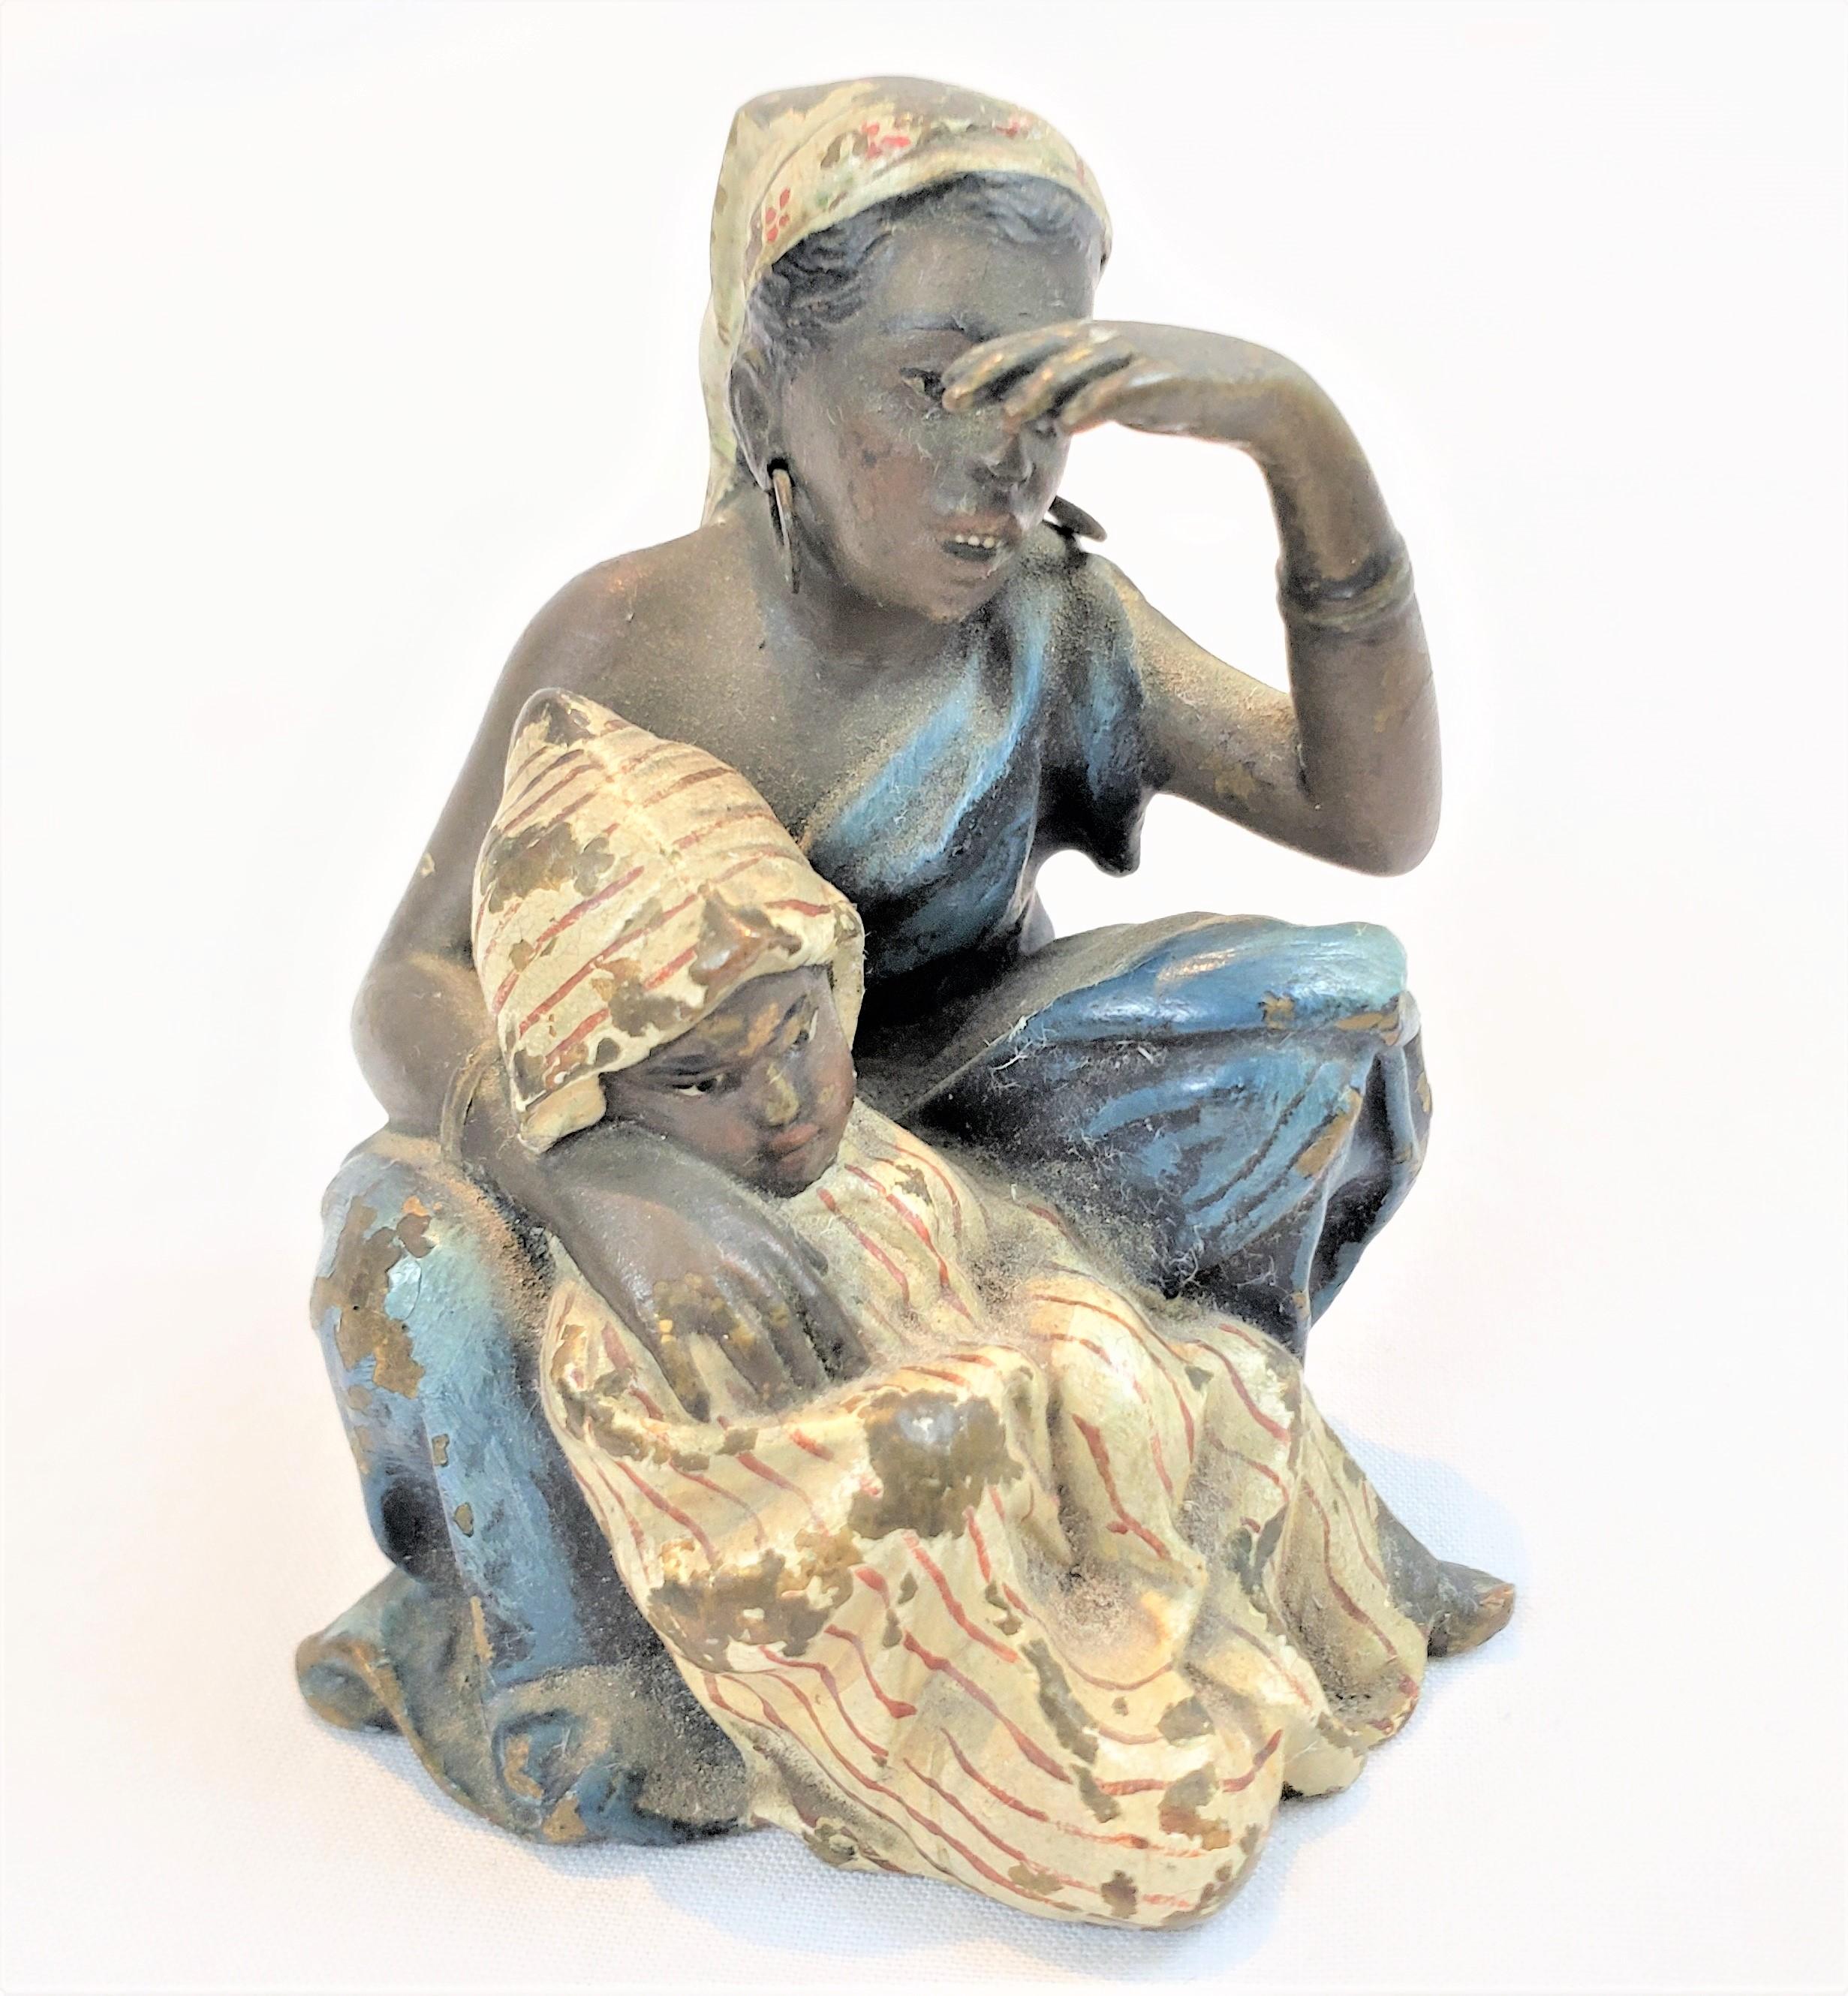 Thisminiature sculpture was done by the renowned Franz Bergman of Austria in approximately 1900 in his signature Bessarabian style. The study is composed of cast bronze with a cold-painted finish depicting a young Arab woman with her child. The